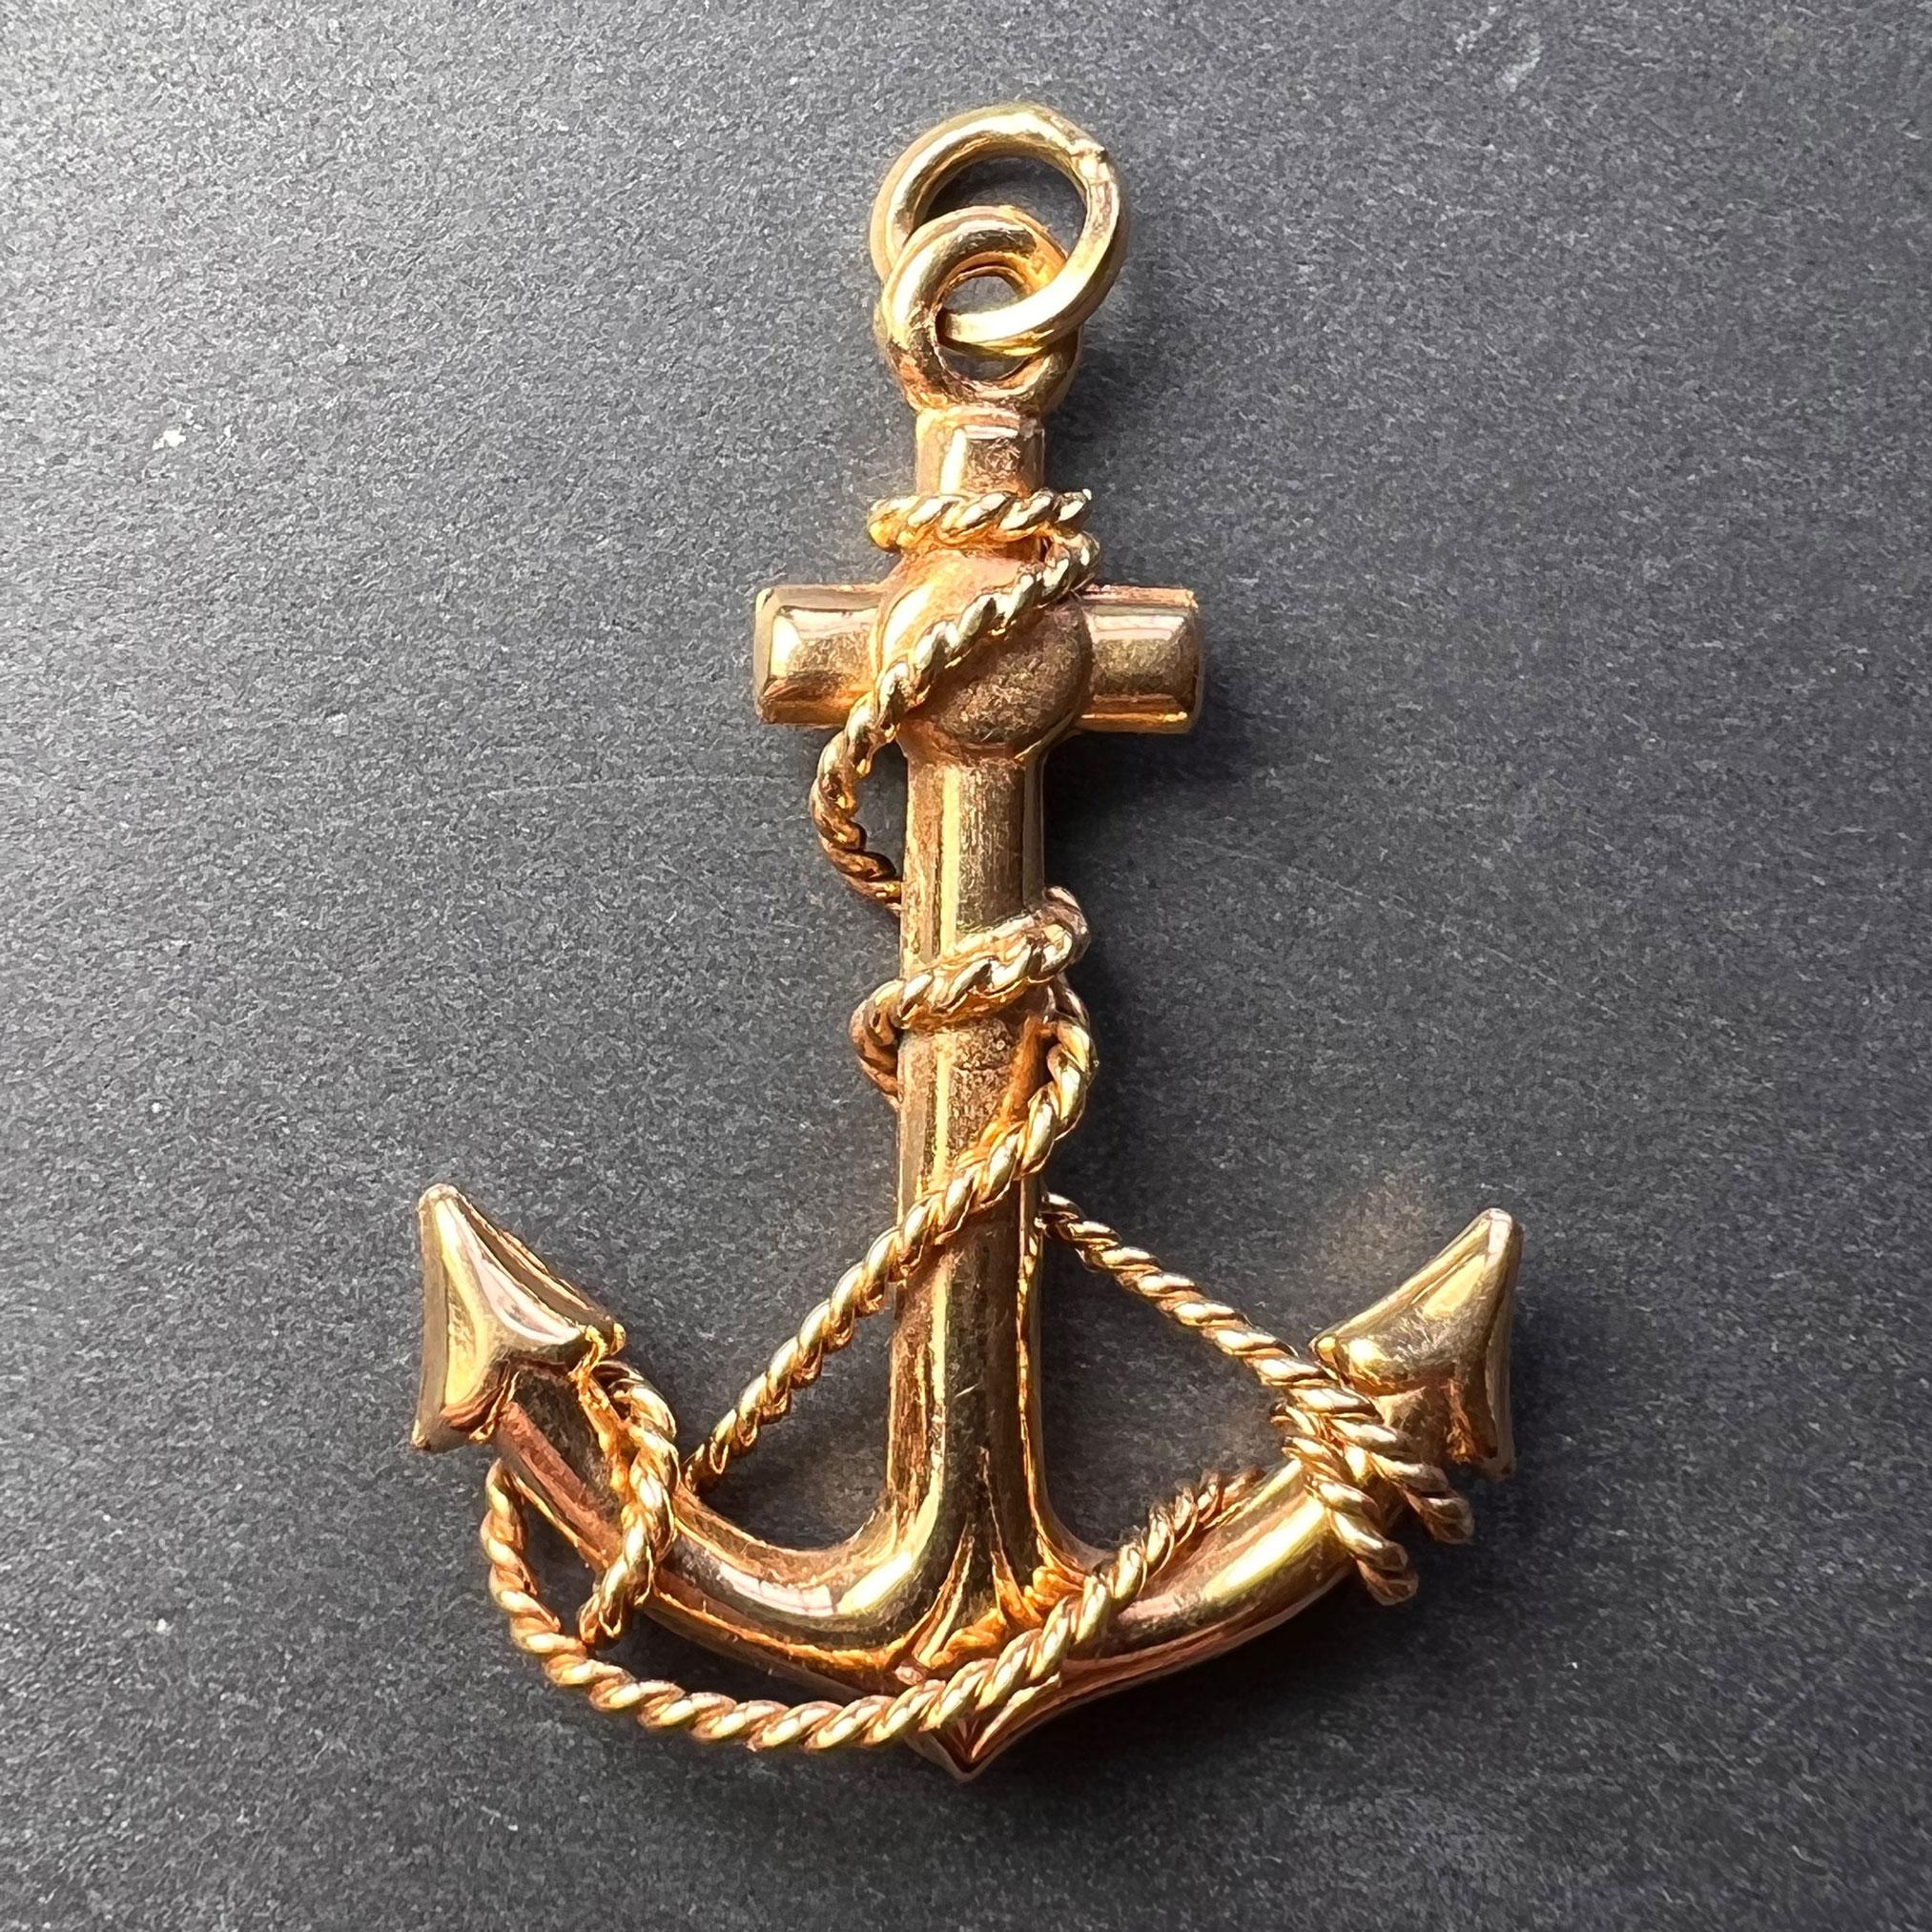 A 14 karat (14K) hollow yellow gold pendant designed as an anchor entwined with a rope symbolising stability and resiliance in difficult times. Stamped 585 for 14 karat gold to the pendant bail.
 
Dimensions: 3.7 x 2.7 x 0.55 cm (not including jump